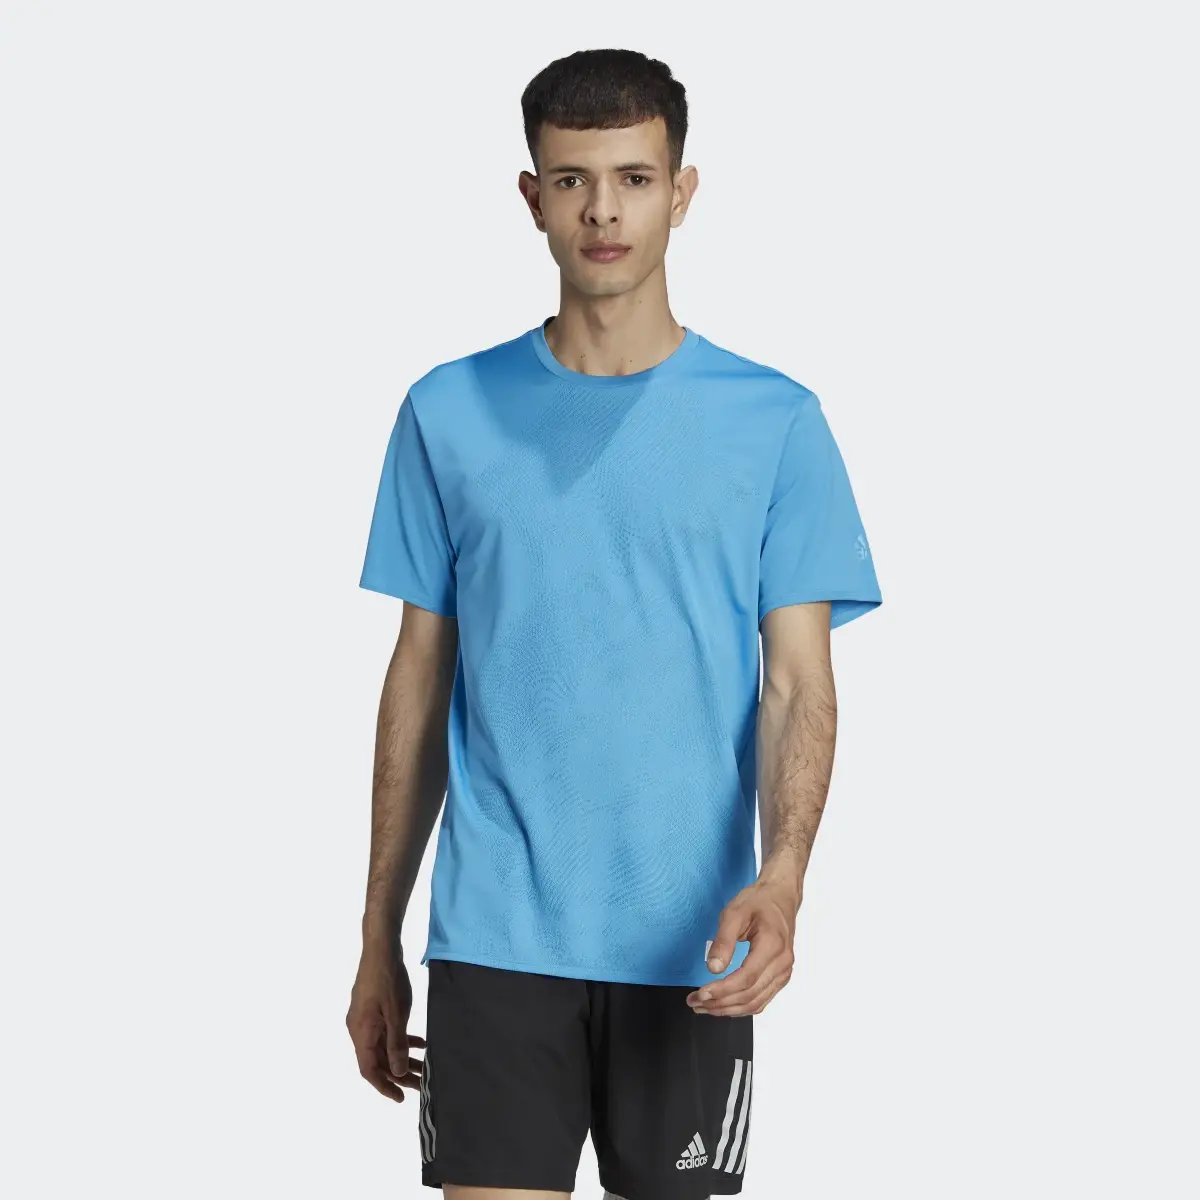 Adidas Made to be Remade T-Shirt. 1